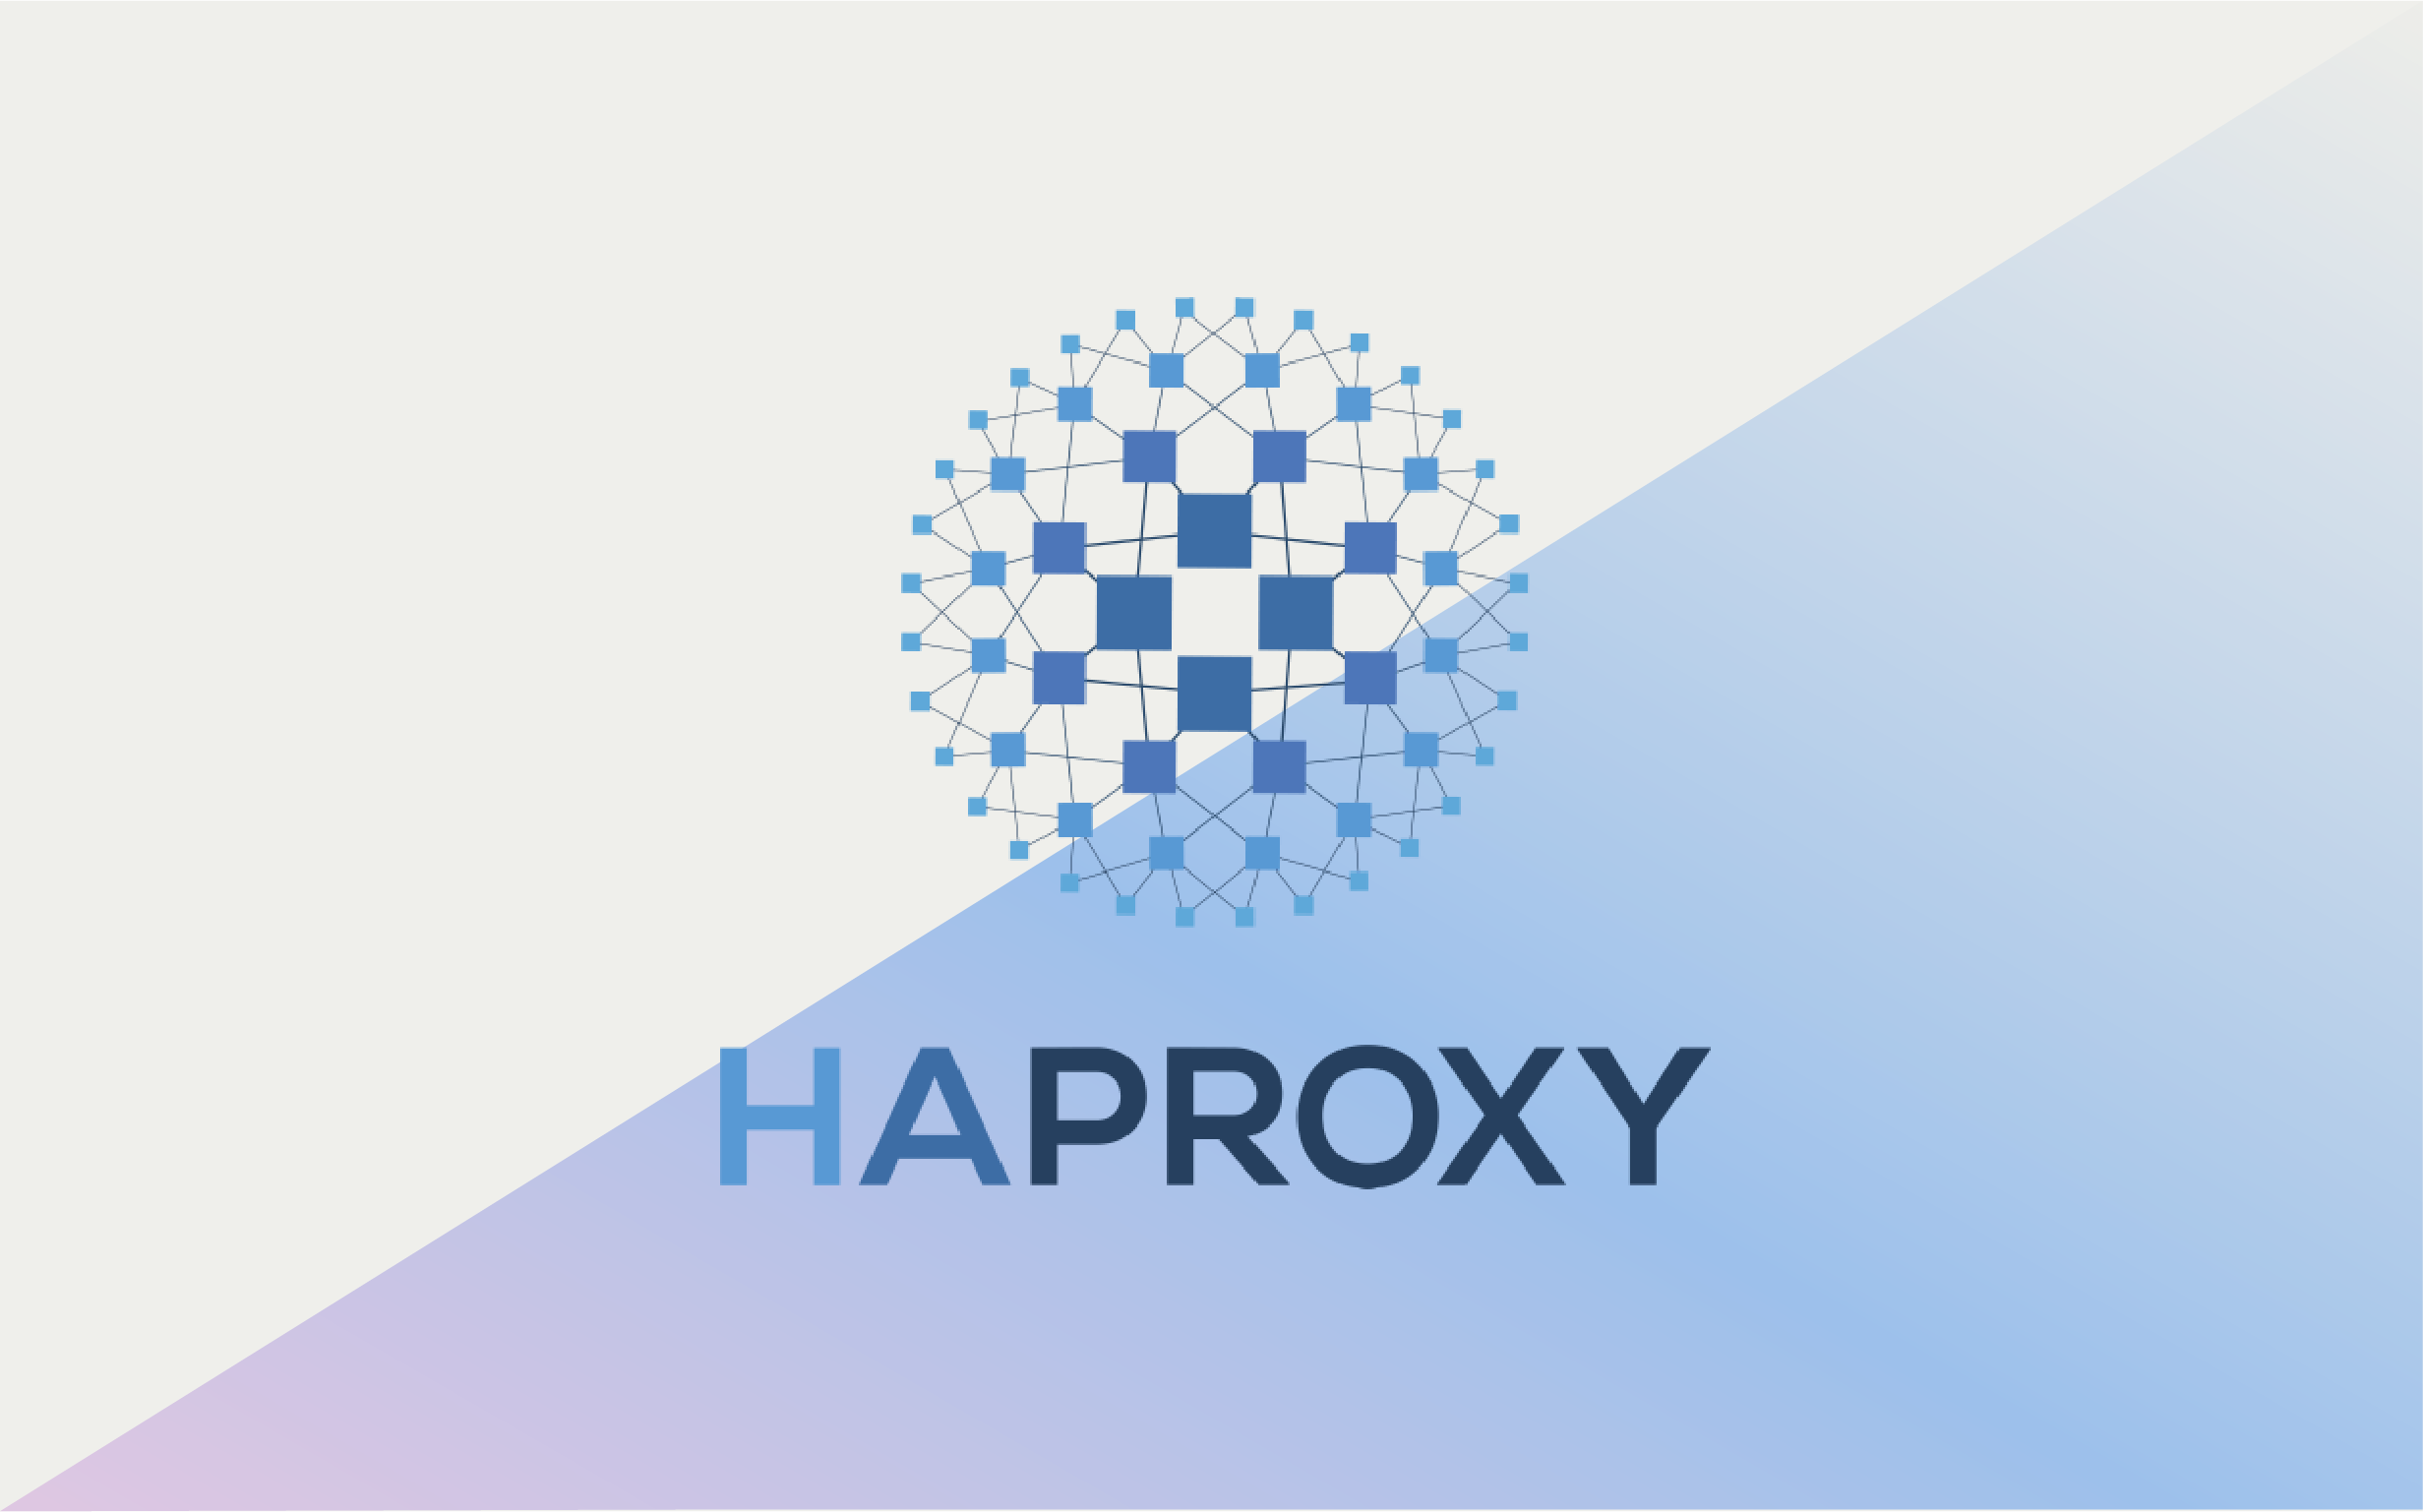 What is HAProxy, and what is it used for?